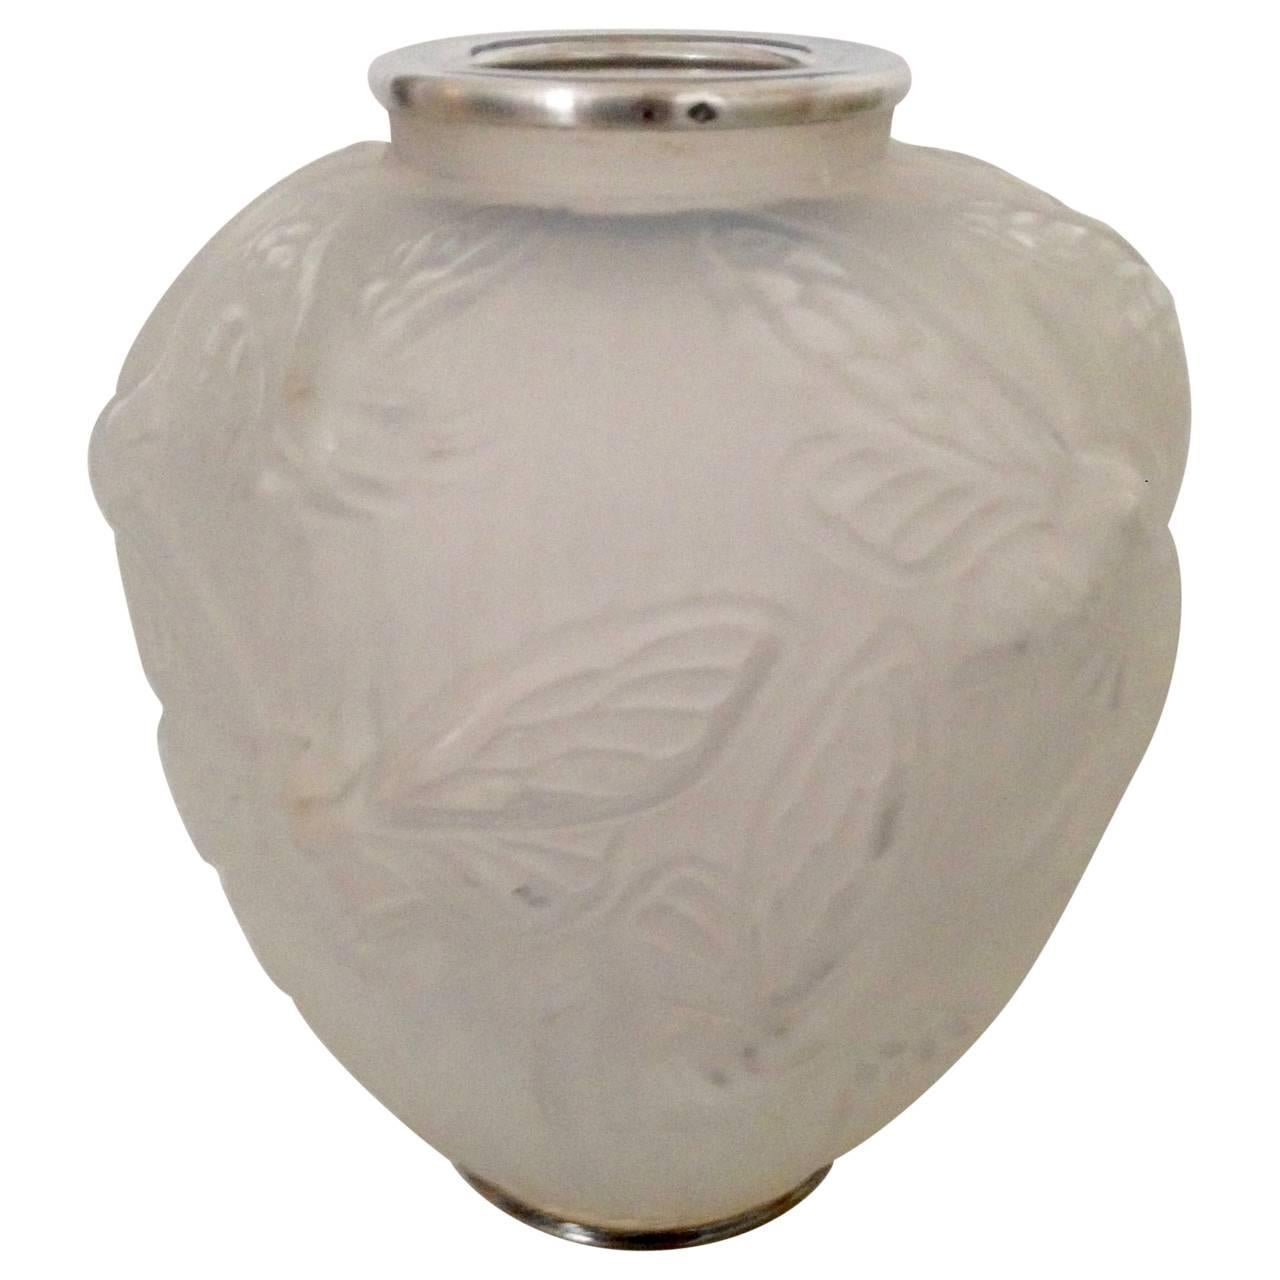 Beautiful milky white Art Deco vase by Verlys. With dragonflies, Libellule in French. Hallmarked silver rim in top and bottom and etched signing 